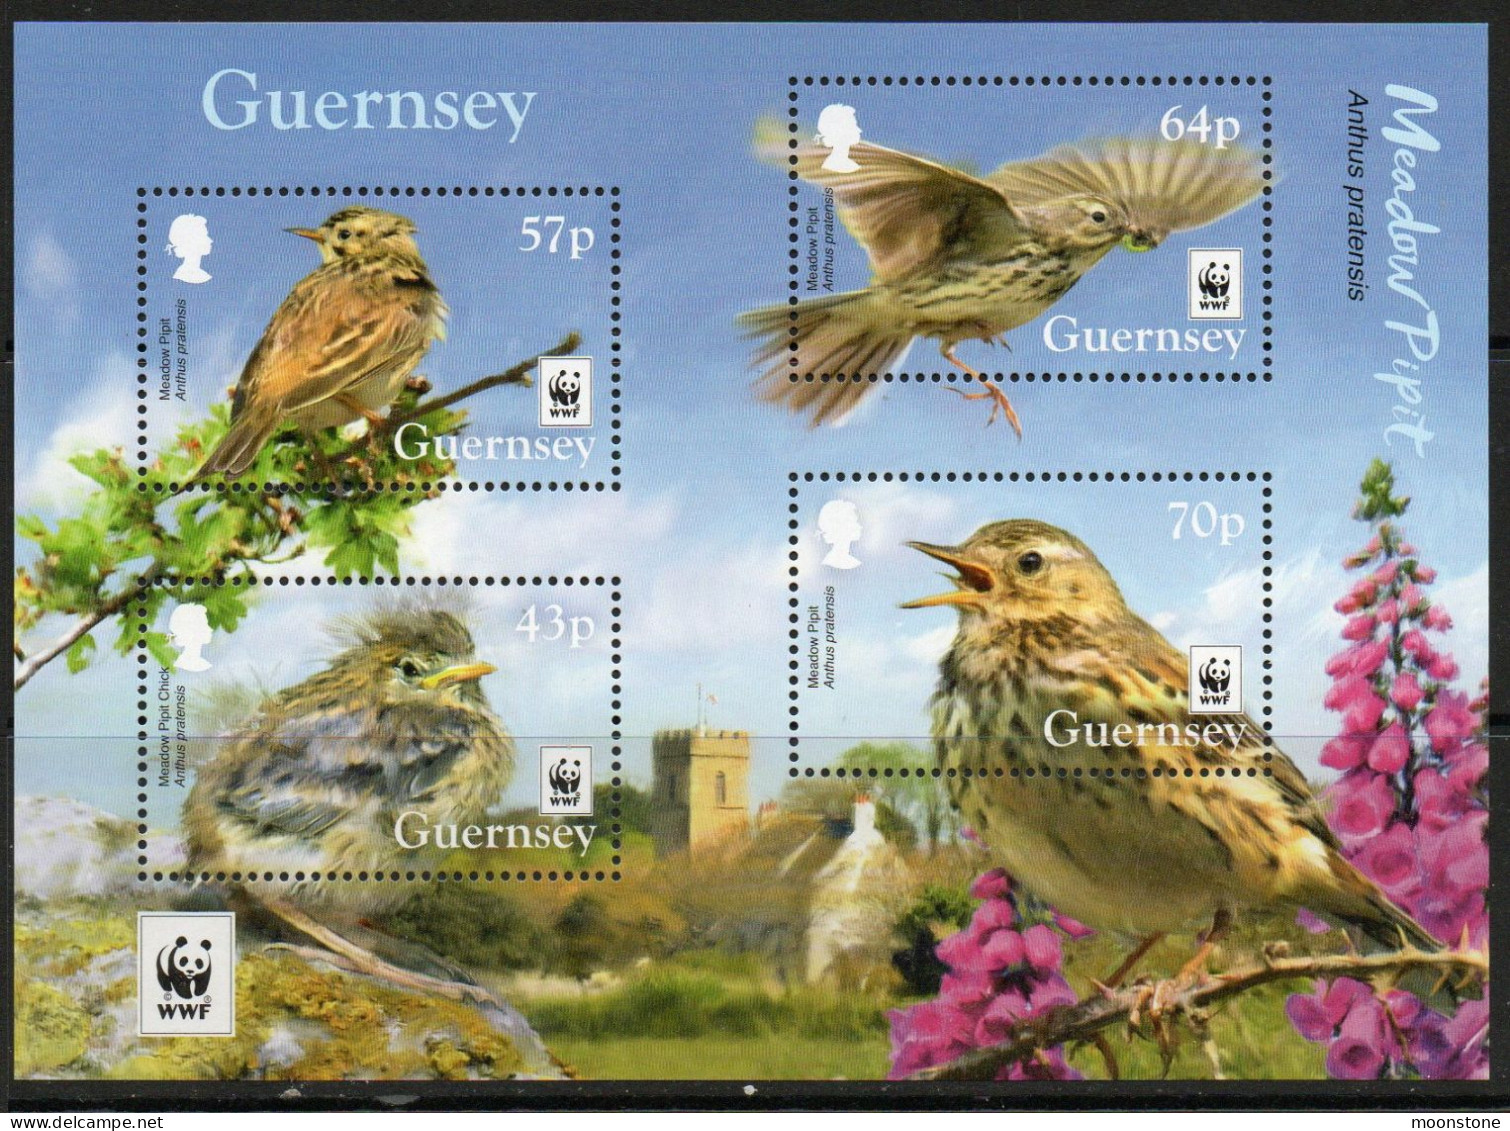 Guernsey 2017 Endangered Species, Meadow Pipit Bird MS, MNH , SG 1655 - Guernesey